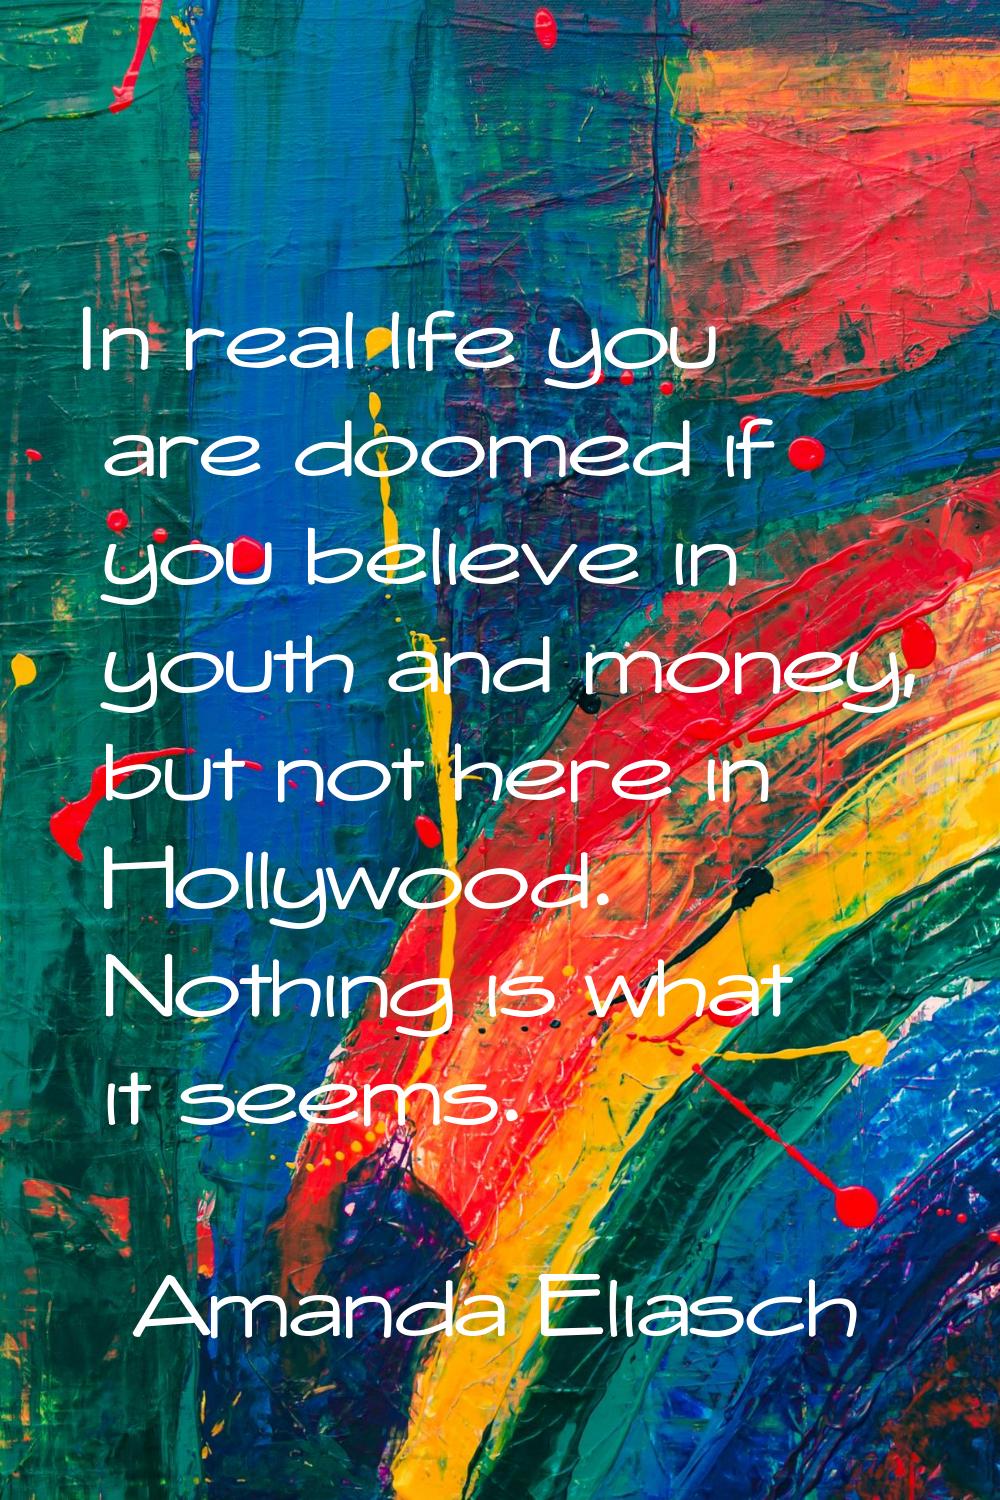 In real life you are doomed if you believe in youth and money, but not here in Hollywood. Nothing i